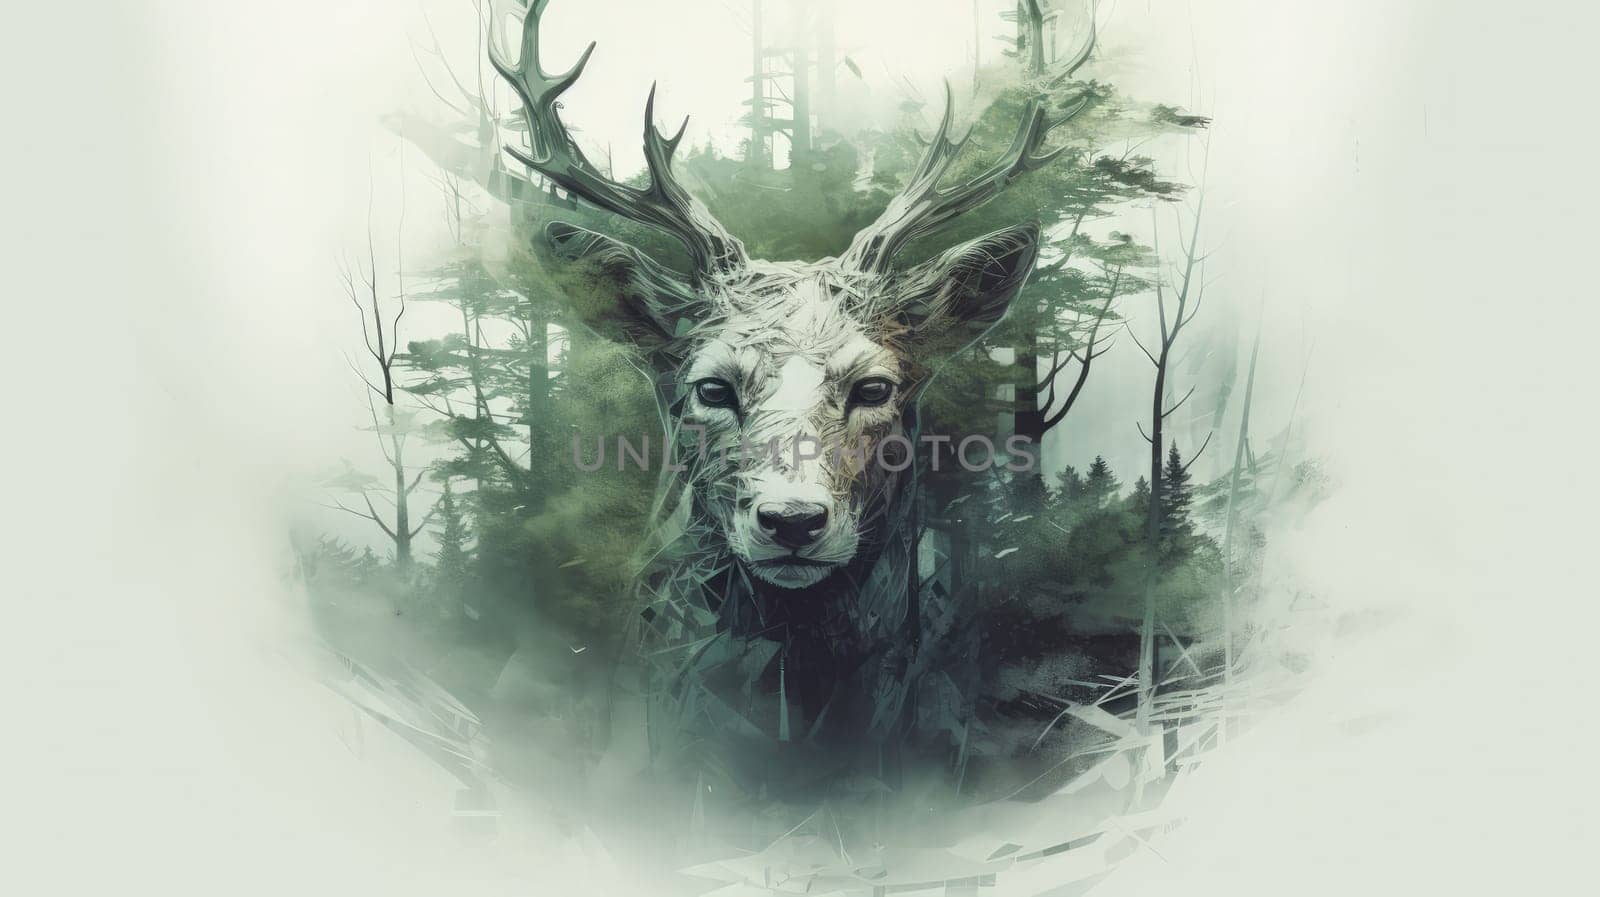 A forest spirit portrayed through double exposure, the ethereal and mystical blending of a natural elements creating a harmonious and enchanting visual narrative